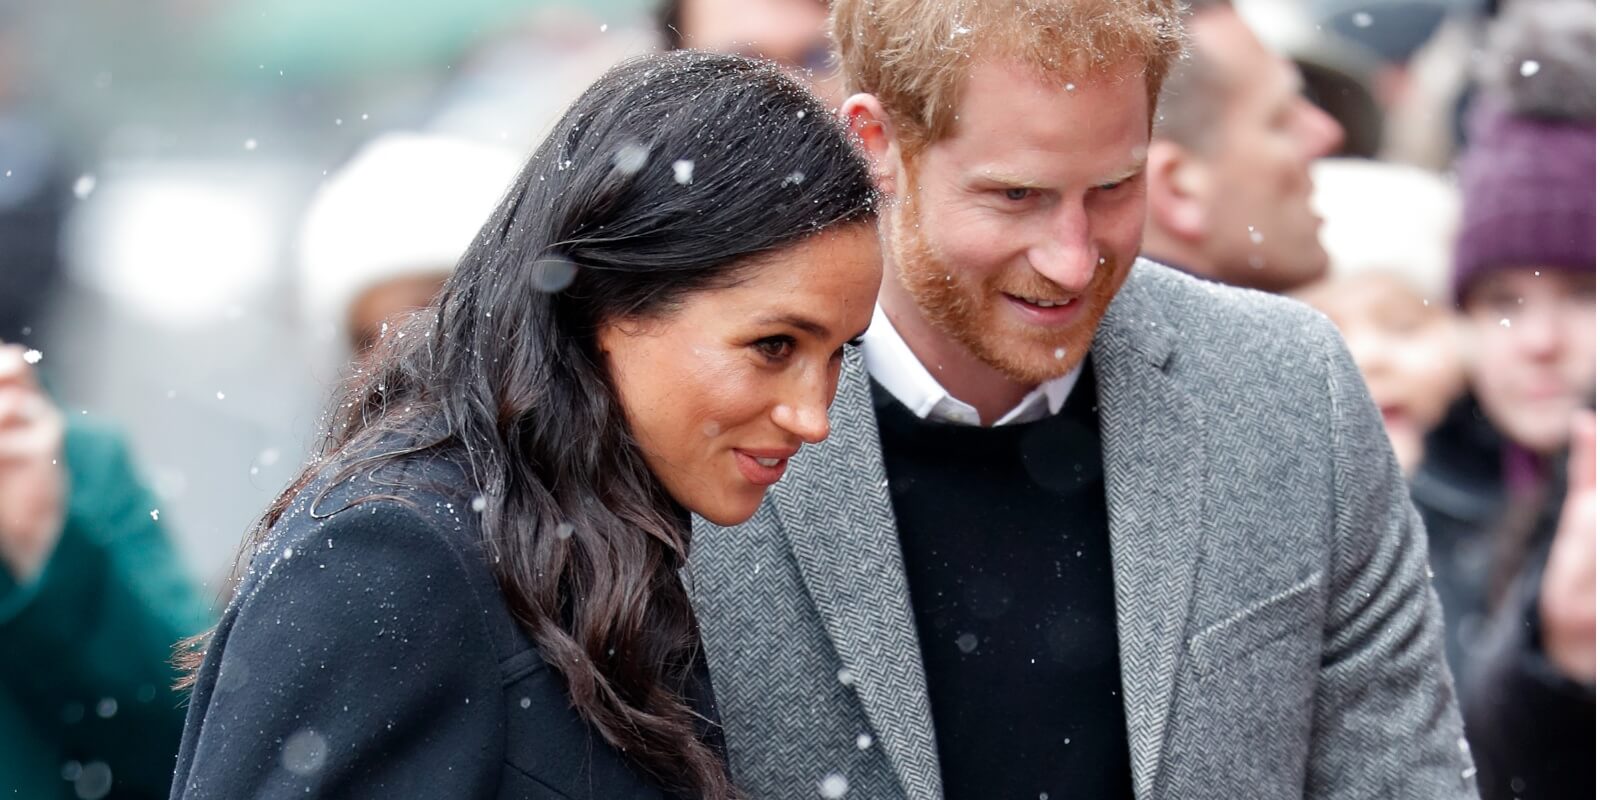 Meghan Markle and Prince Harry walk in the snow for a visit to the Bristol Old Vic on February 1, 2019 in Bristol, England.